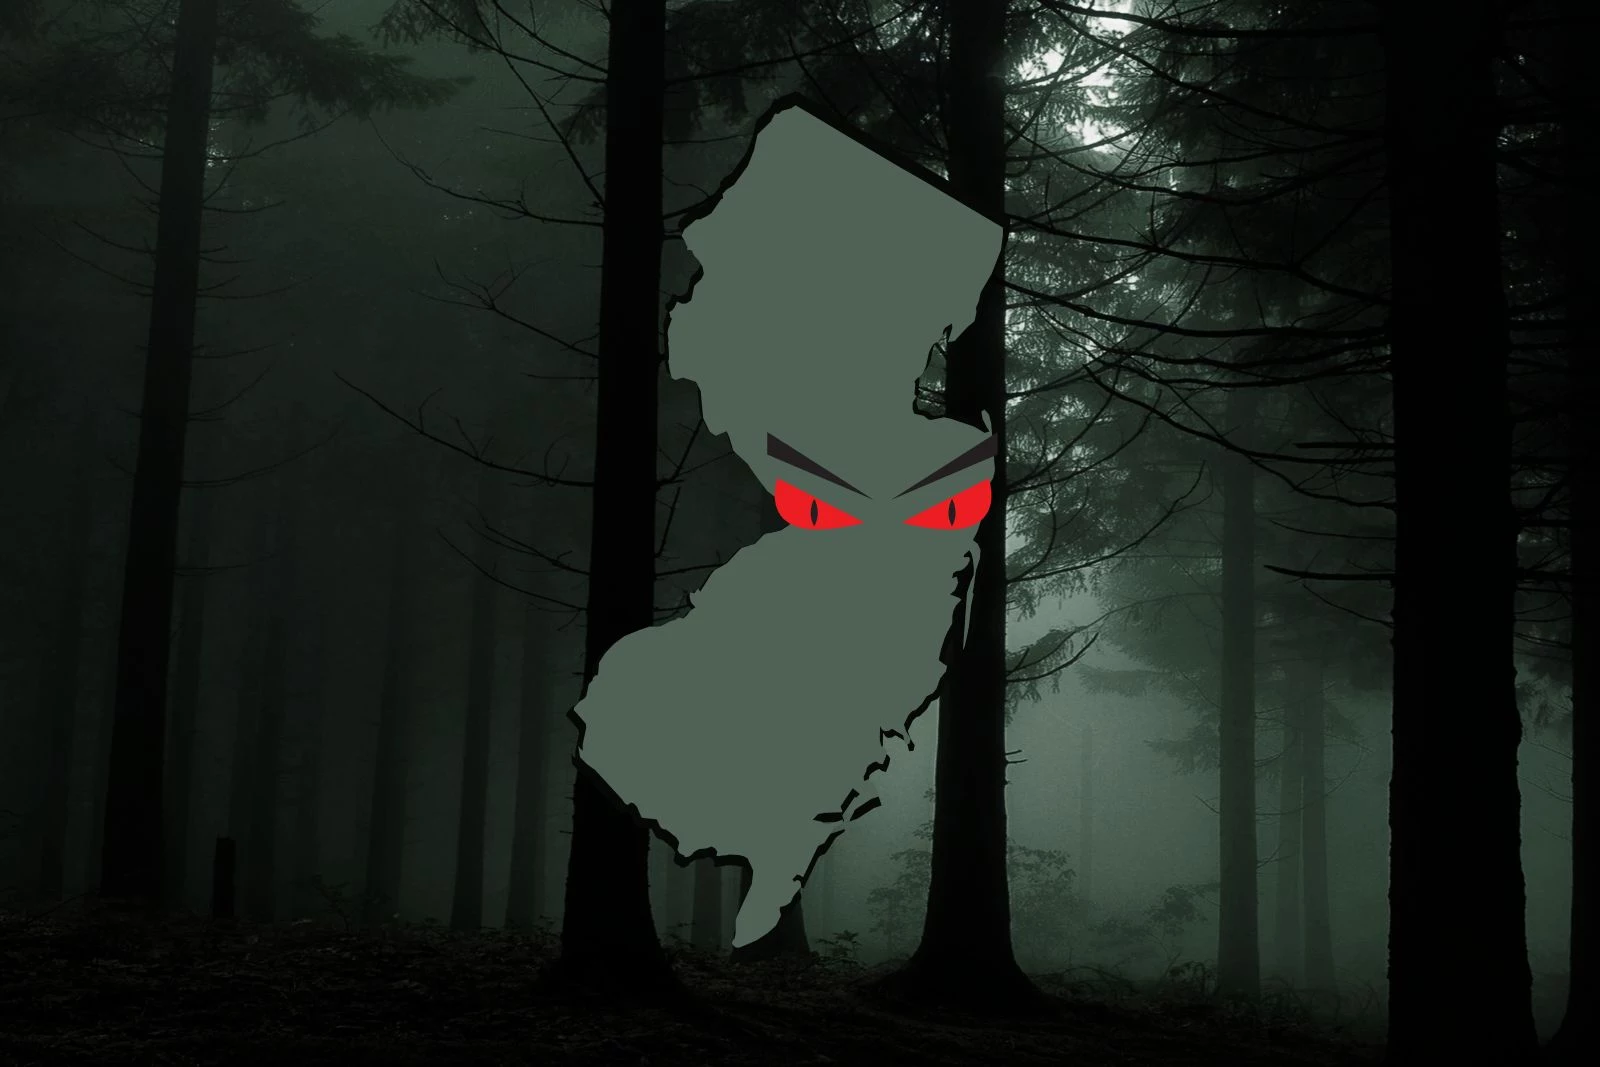 NJ resident says he has photo evidence of Jersey Devil